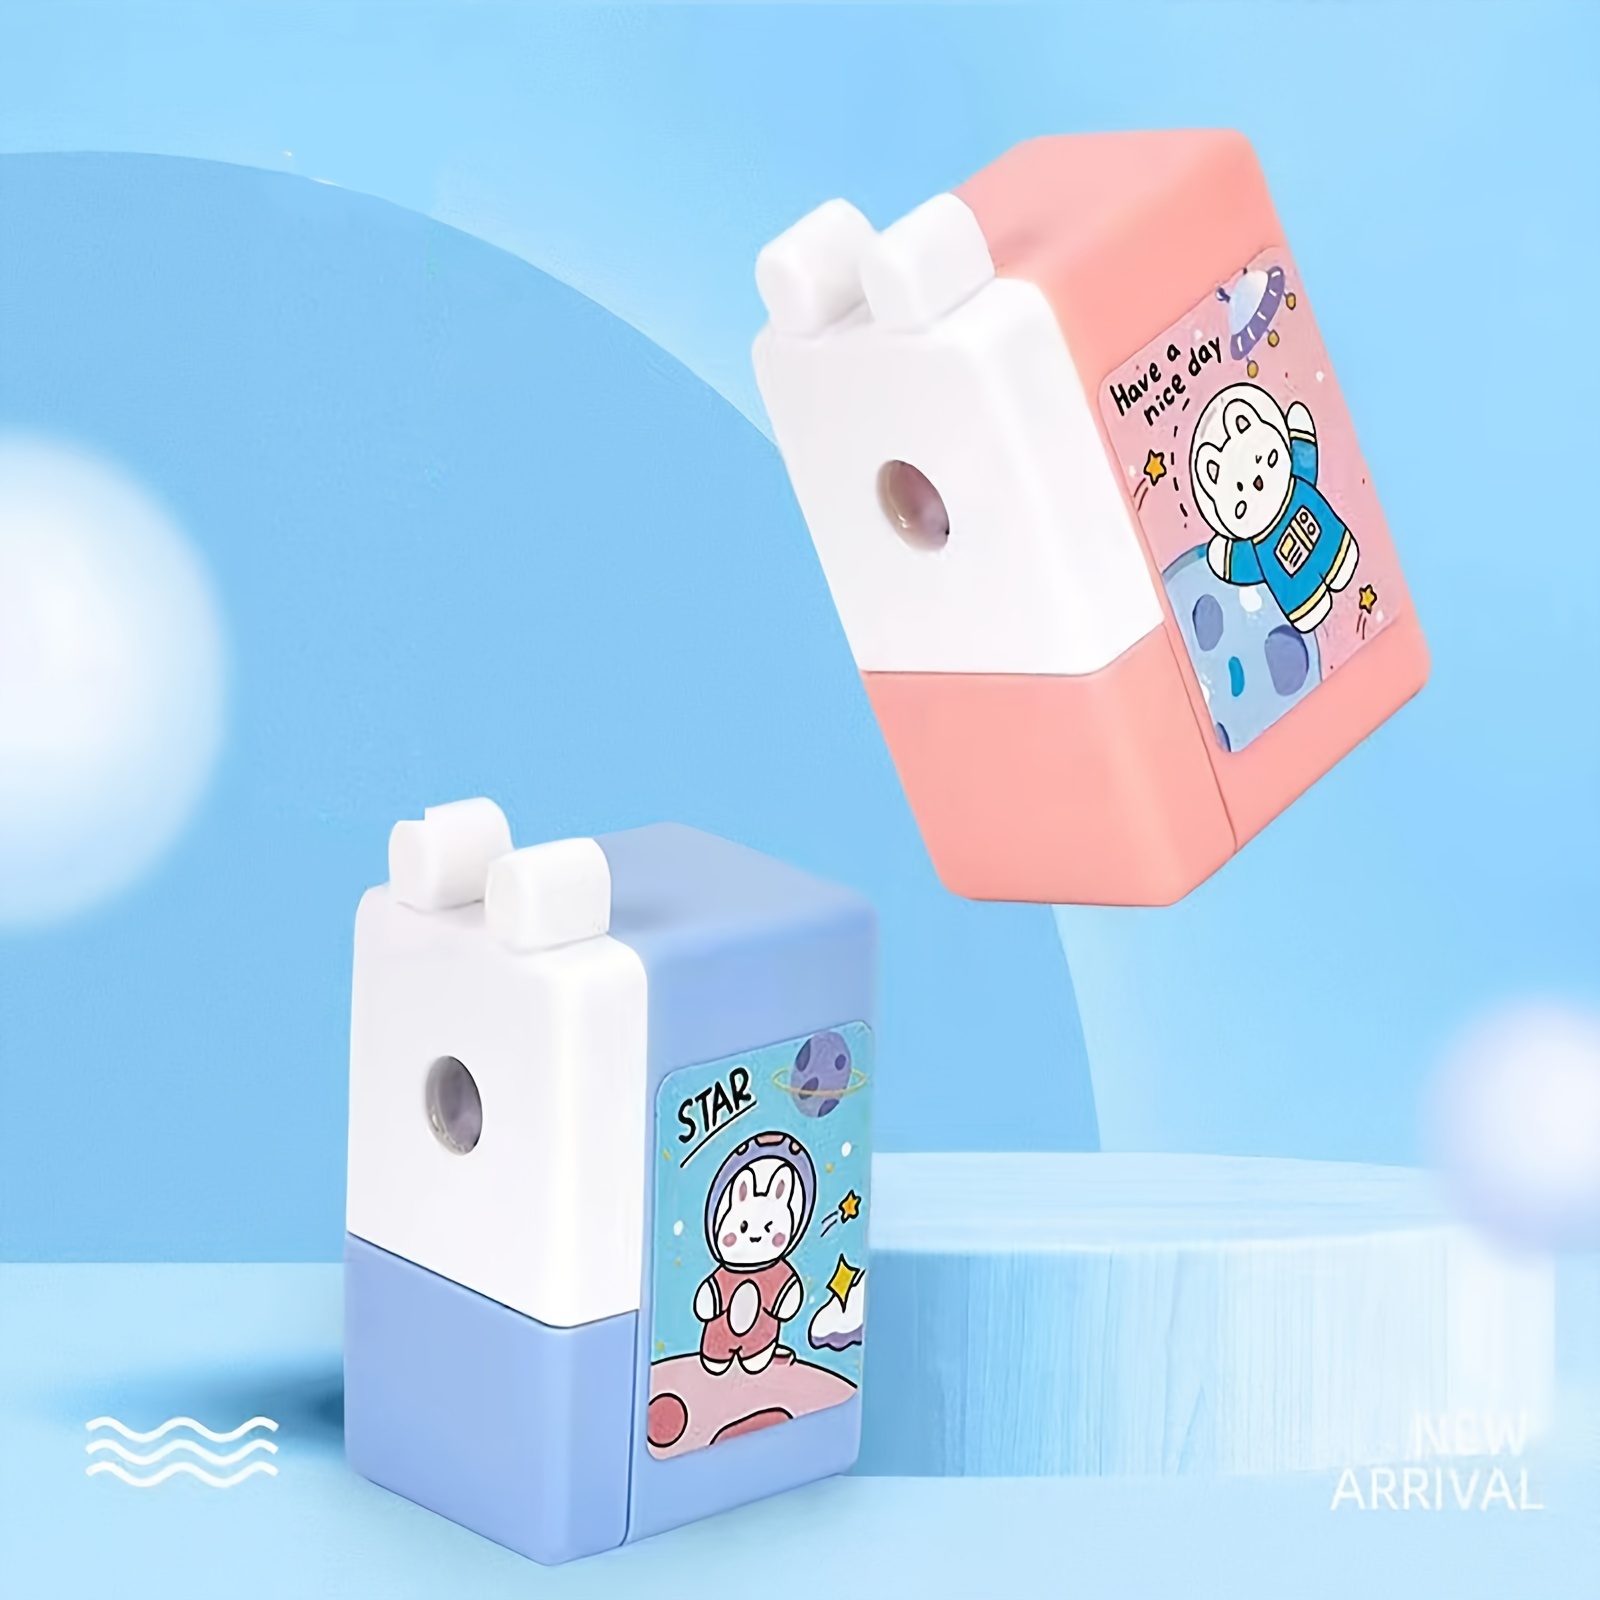 Unicorn Pencil Sharpener for Kids, Manual Pencil Sharpener for Colored  Pencils, Cute Pencil Sharpener with Unicorn Erasers and Stickers for School